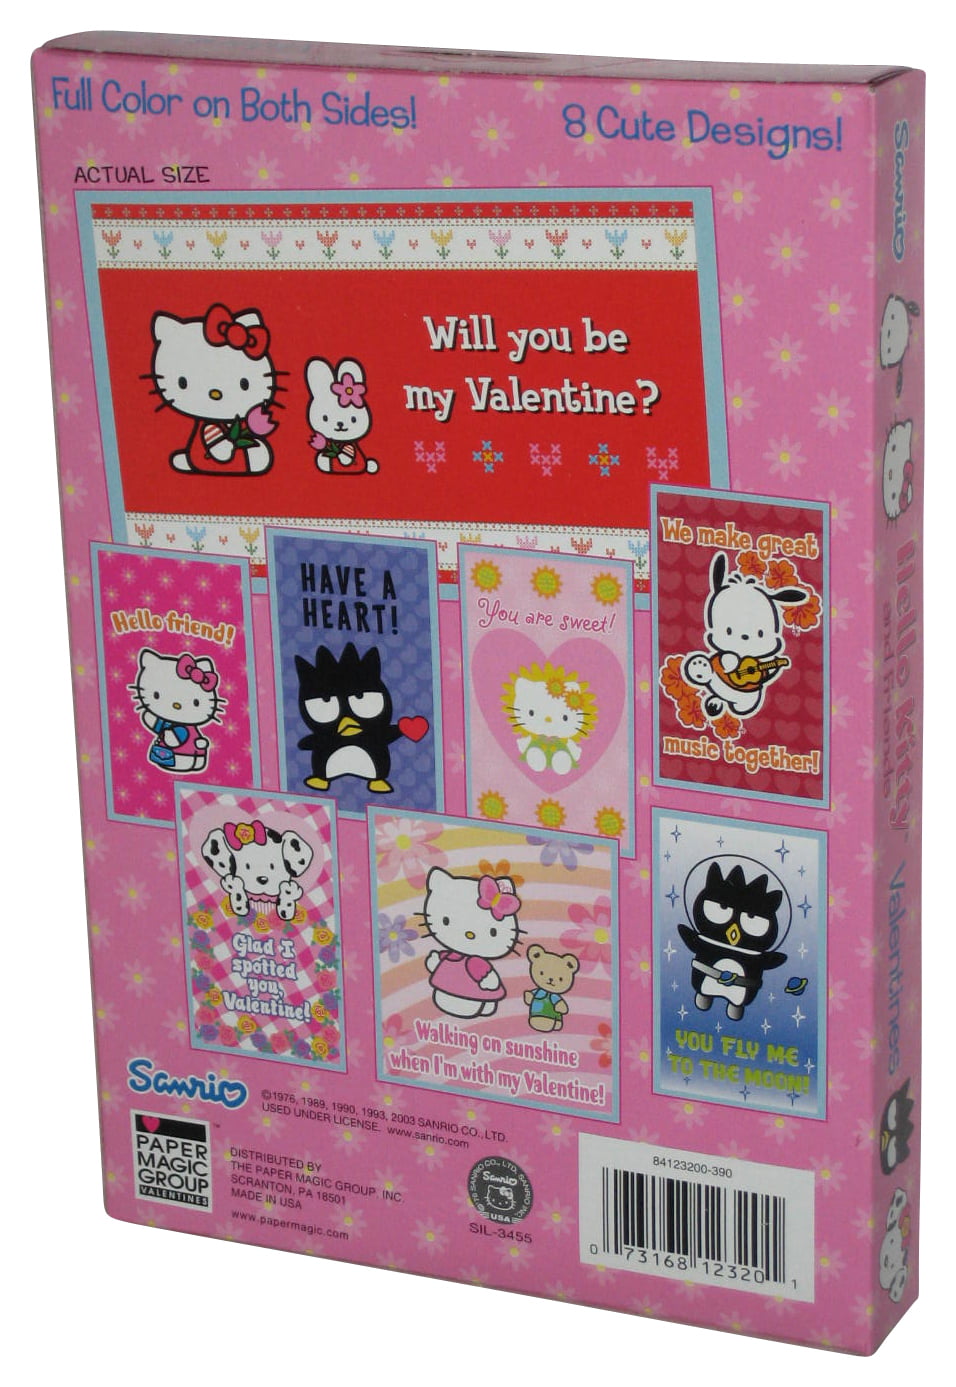 Hello Kitty and Friends Sanrio (2003) Paper Magic Valentines Day Cards